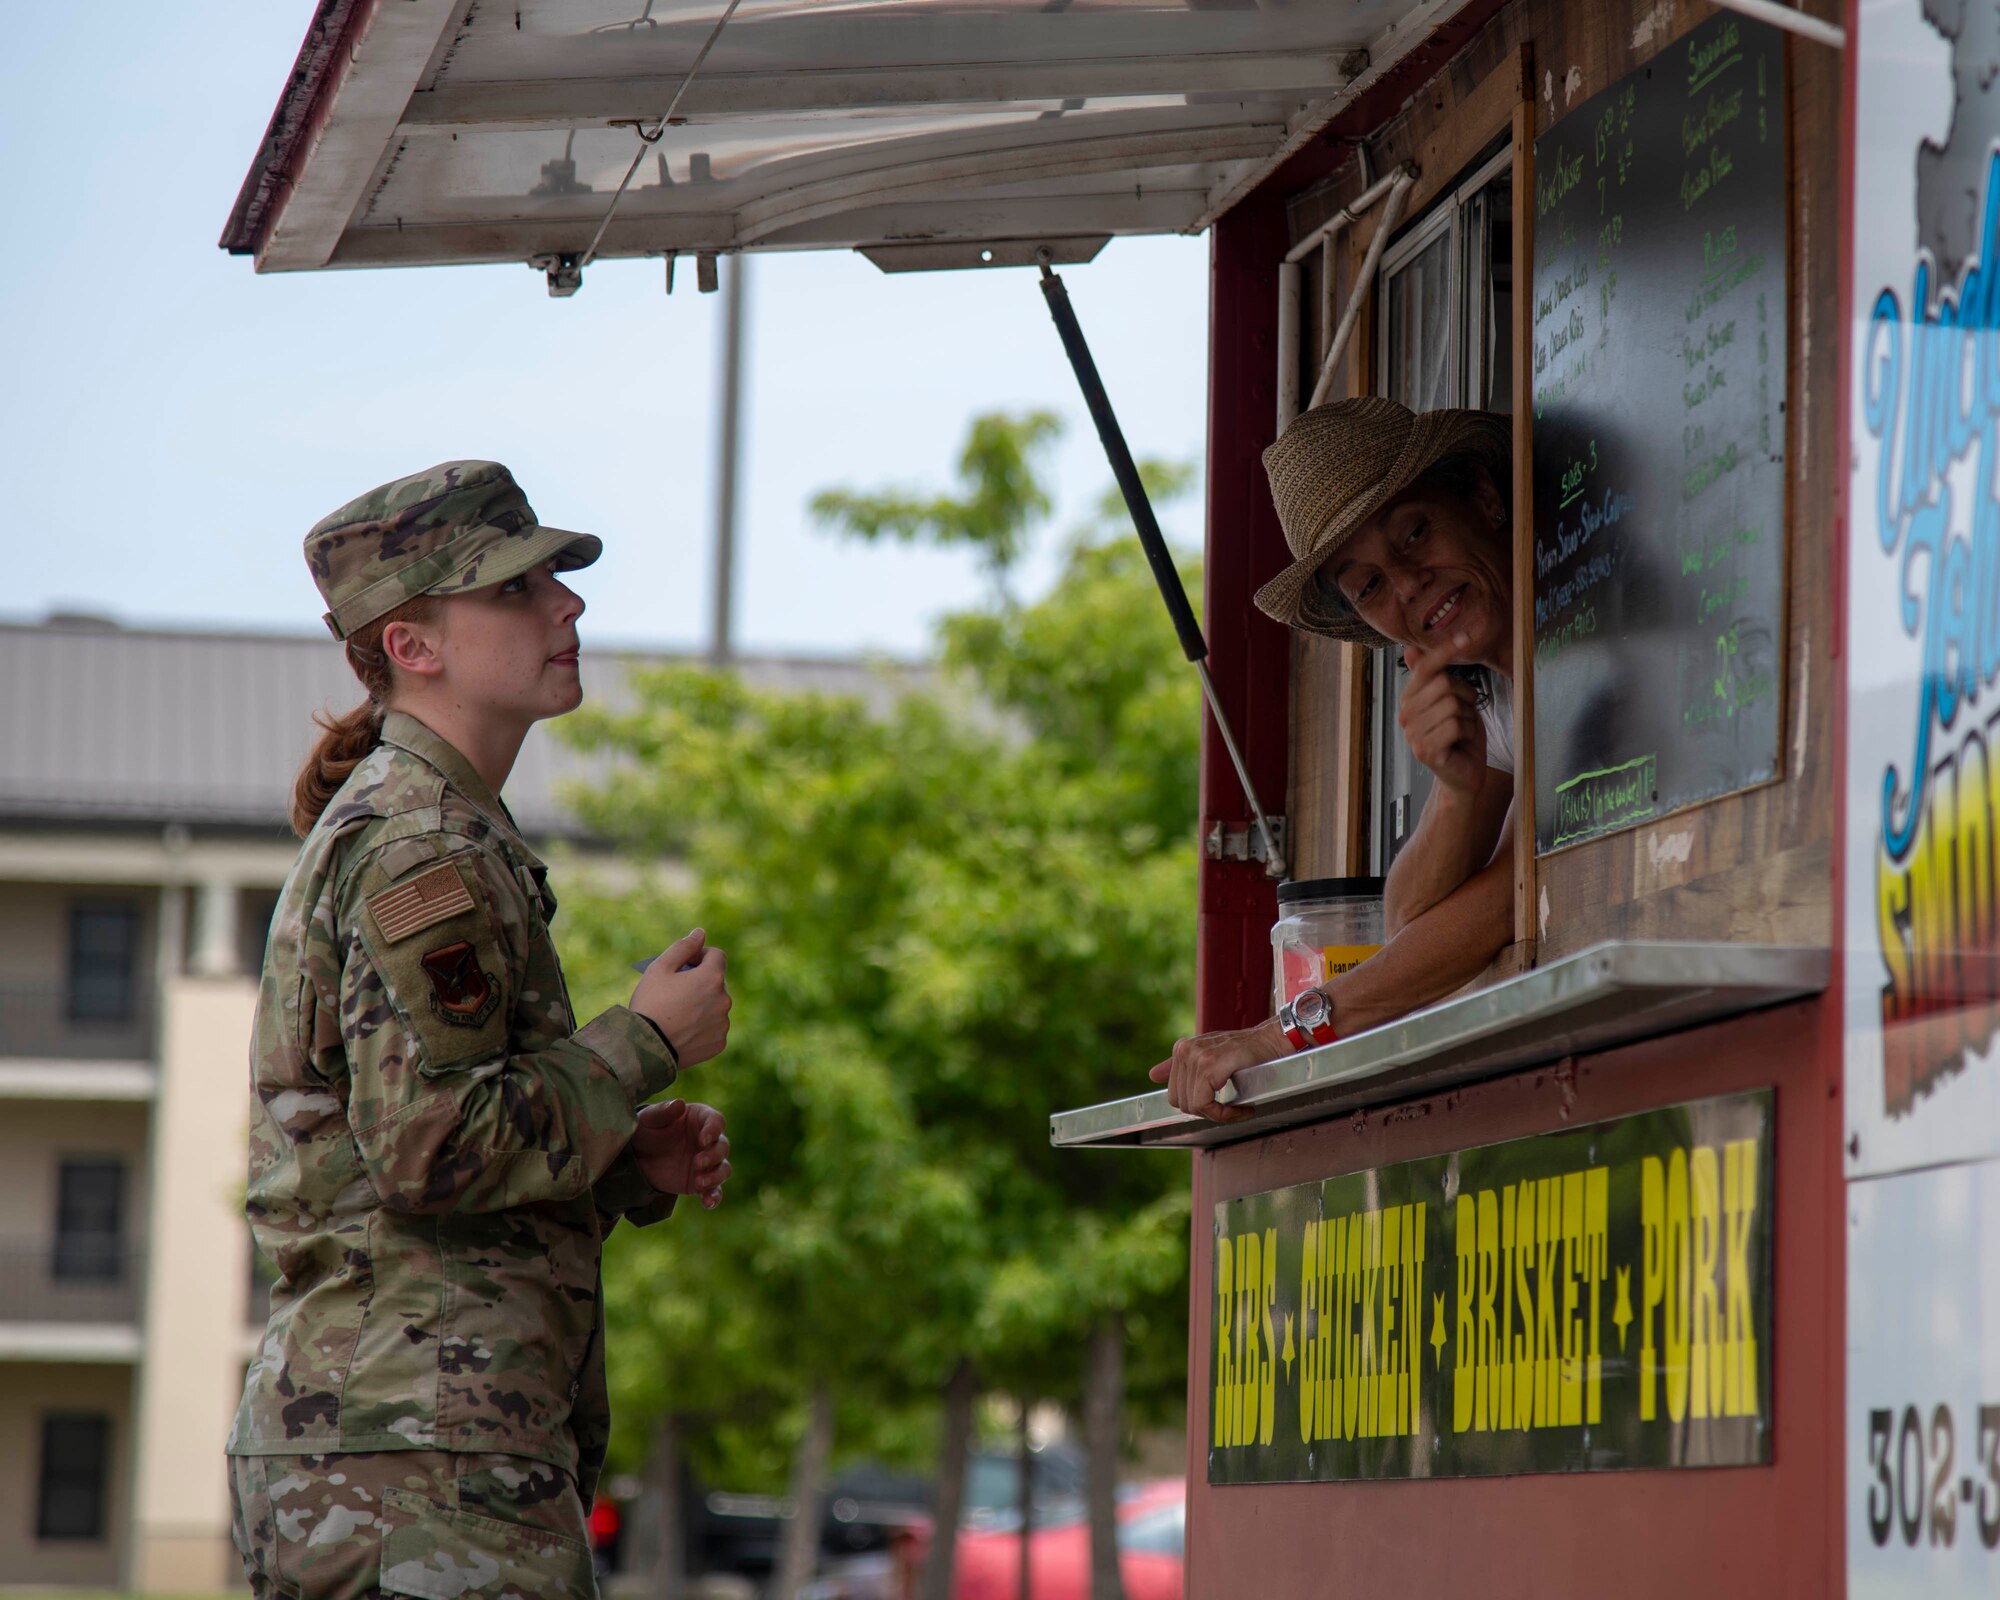 Airman 1st Class Cydney Lee, 436th Airlift Wing Public Affairs specialist, purchases a meal from a food truck in front of the Patterson Dining Facility at Dover Air Force Base, Delaware, July 15, 2021. The DFAC closed for renovations on its electrical systems and walk-in refrigerator. The 436th Force Support Squadron coordinated bringing various food trucks onto Dover AFB to provide options for Airmen during the closure. (U.S. Air Force photo by Tech. Sgt. J.D. Strong II)